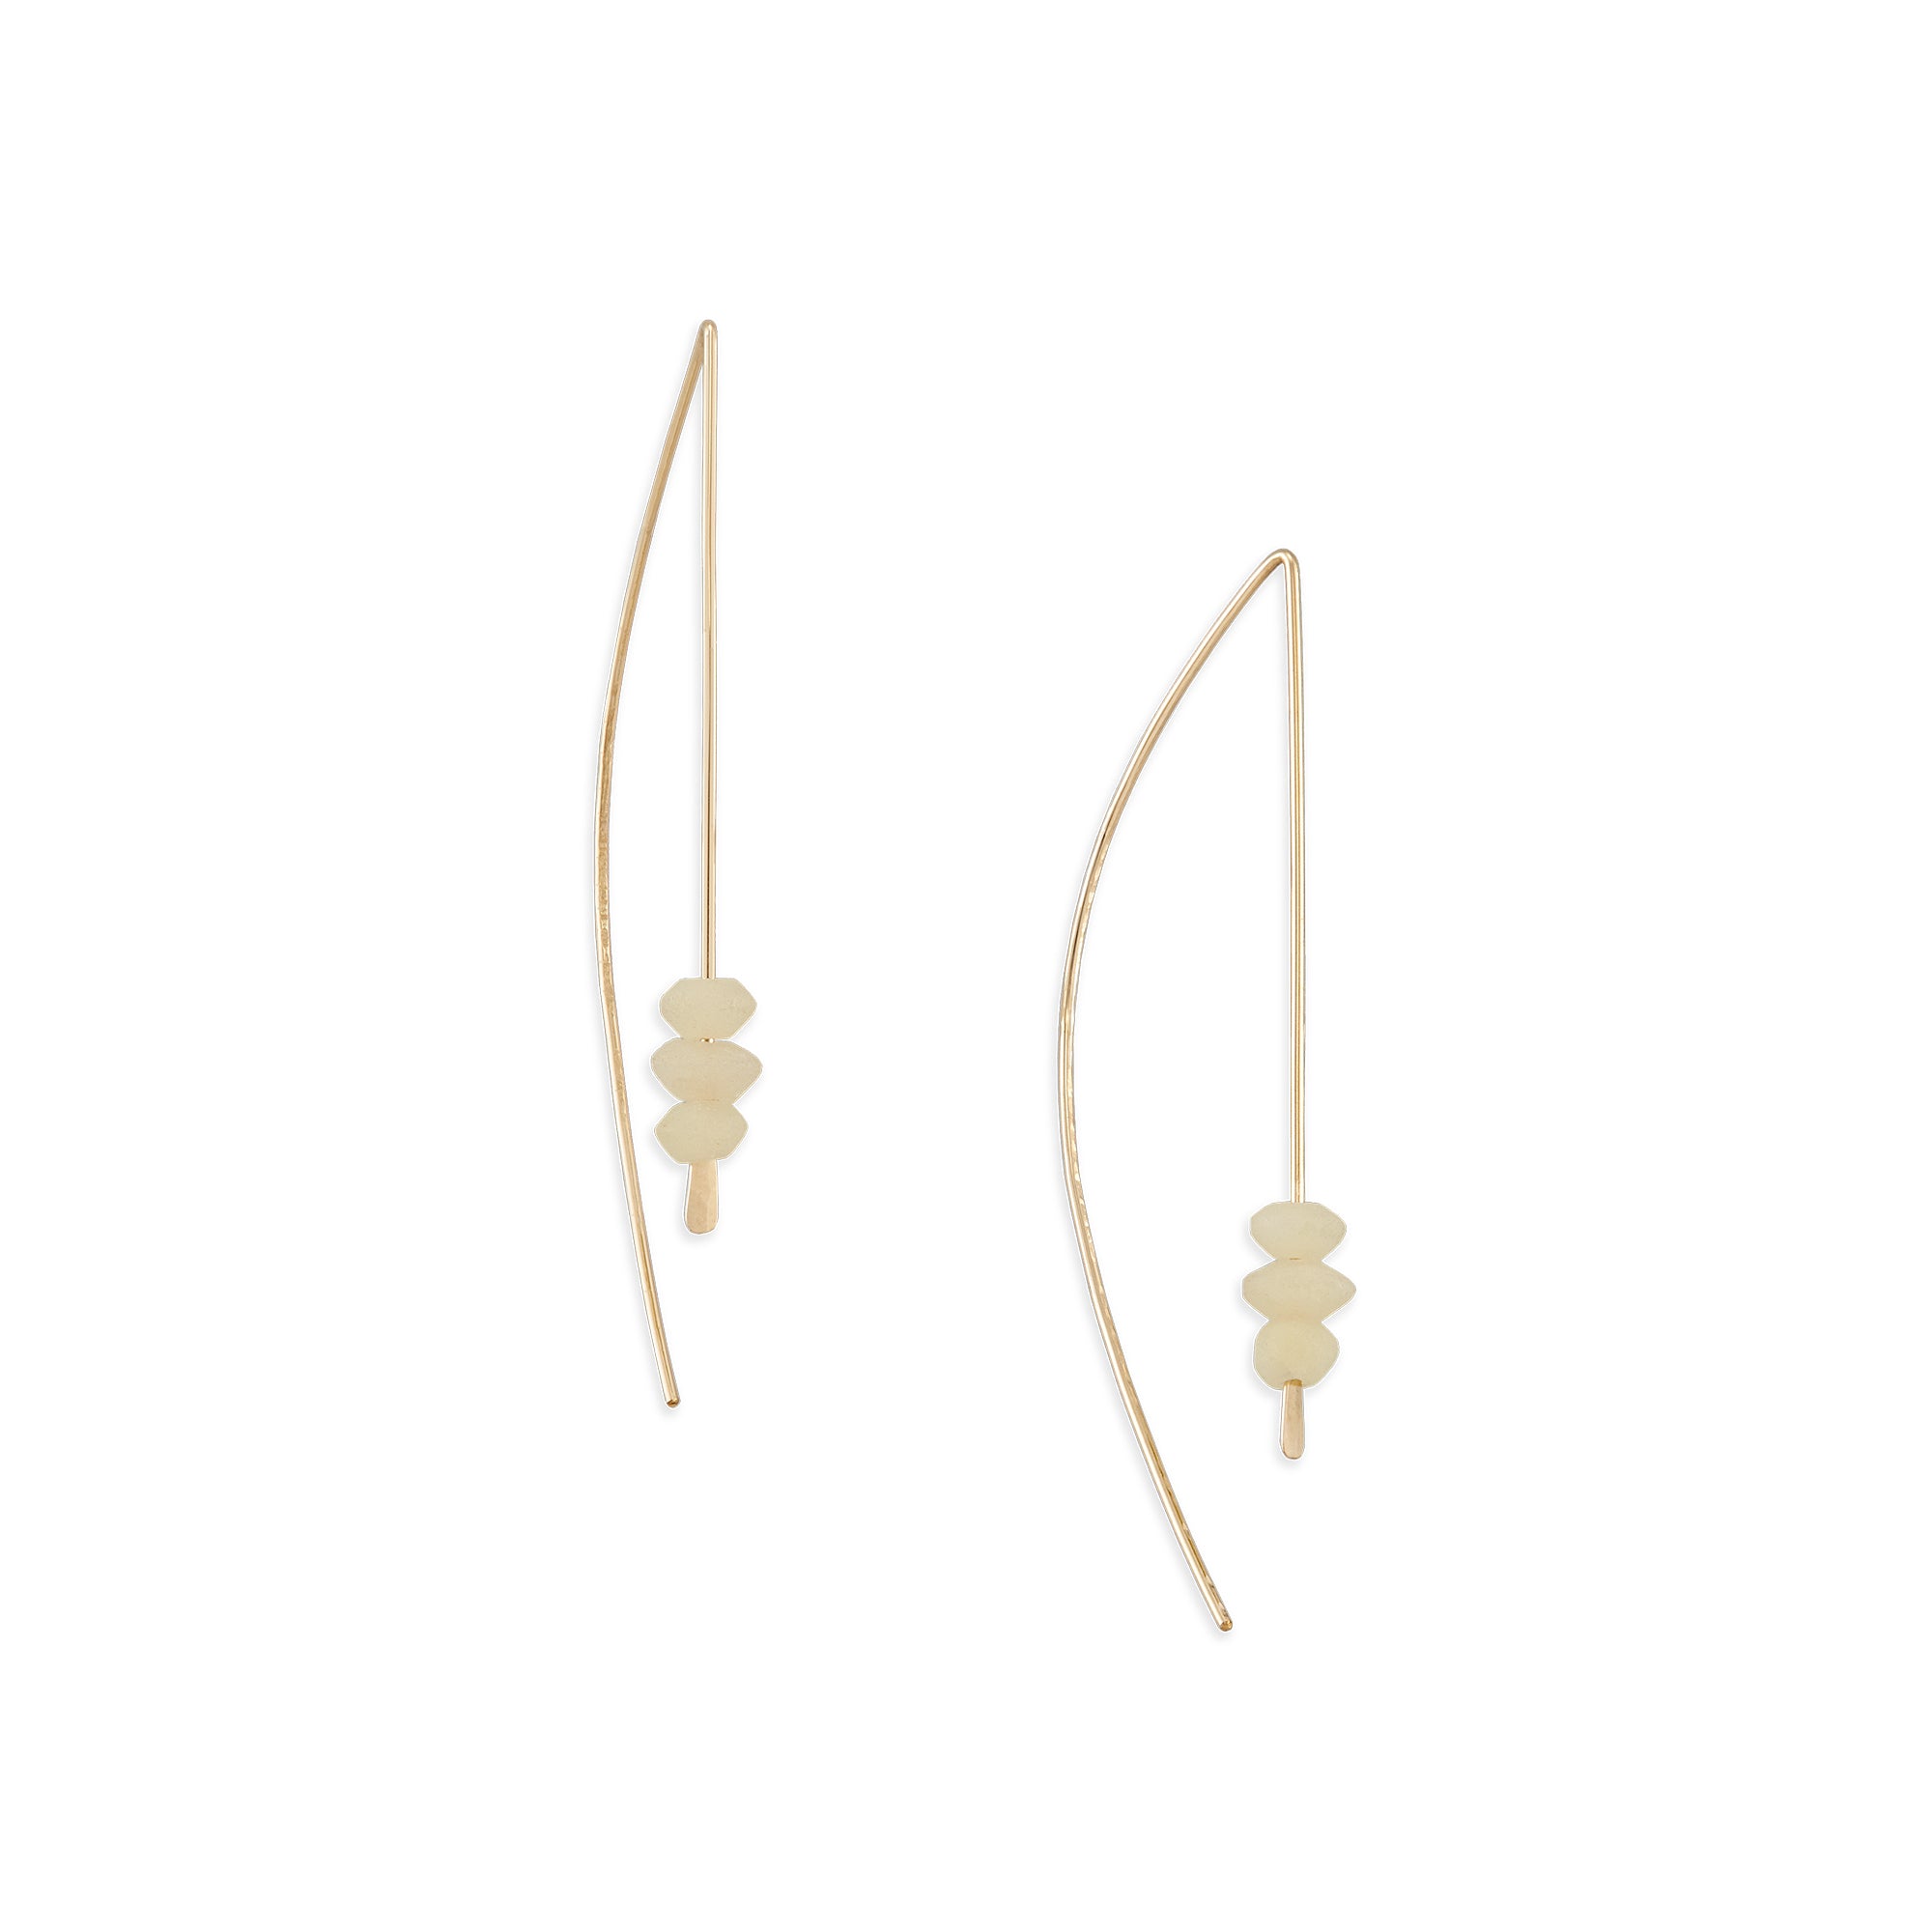 A modern threader earring with a pop of color from semi-precious onyx stones, the arch earring is sure to be a staple